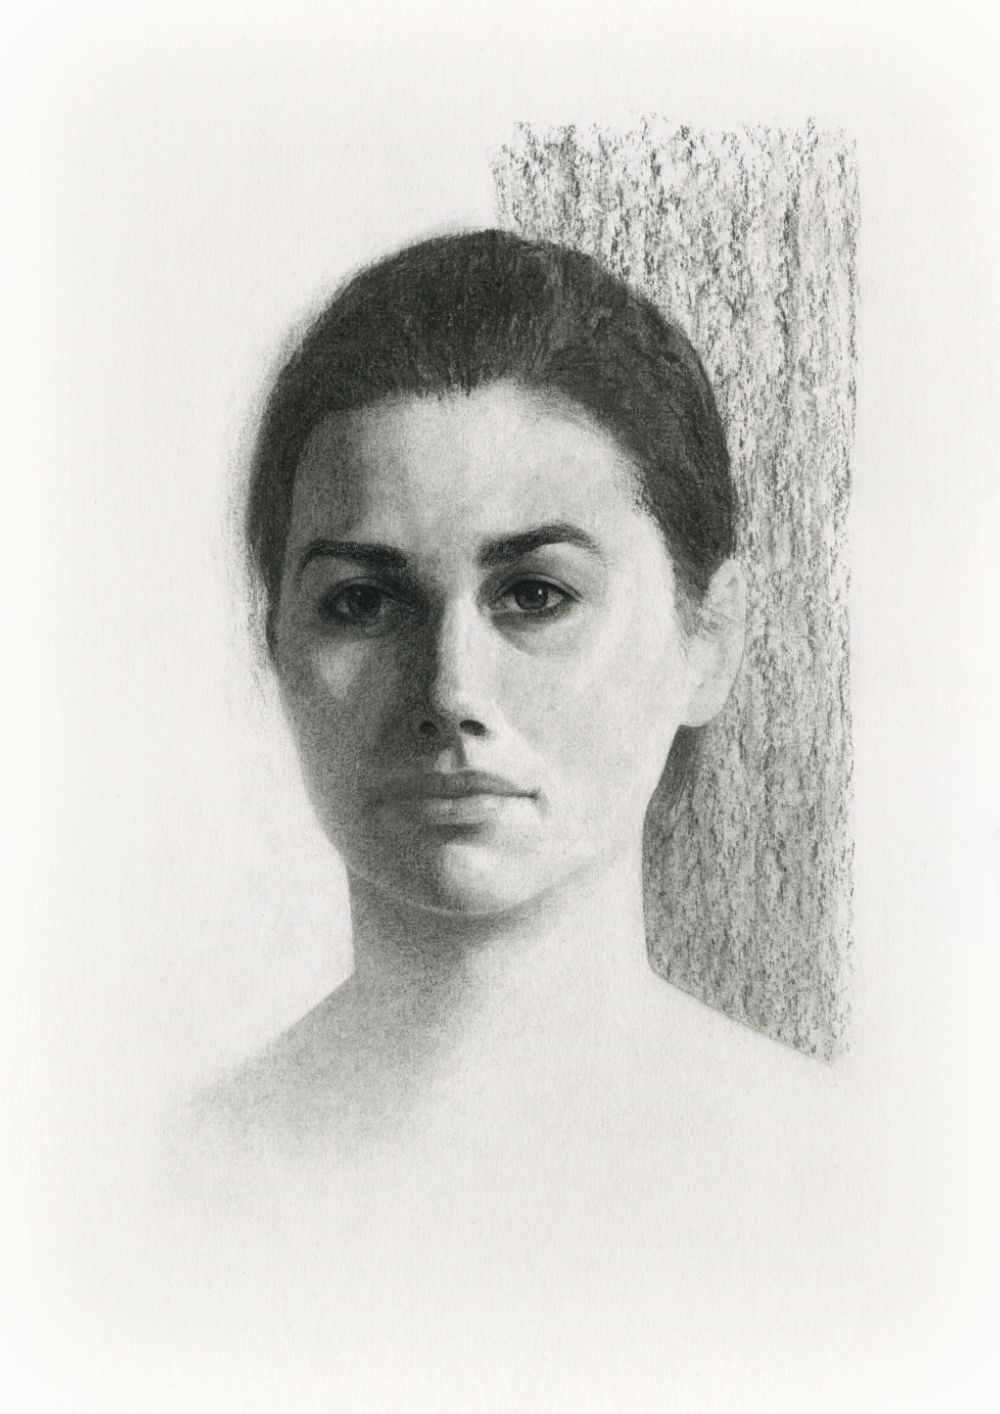 Portrait Study in Charcoal on Paper, by Artist & Illustrator James Martin